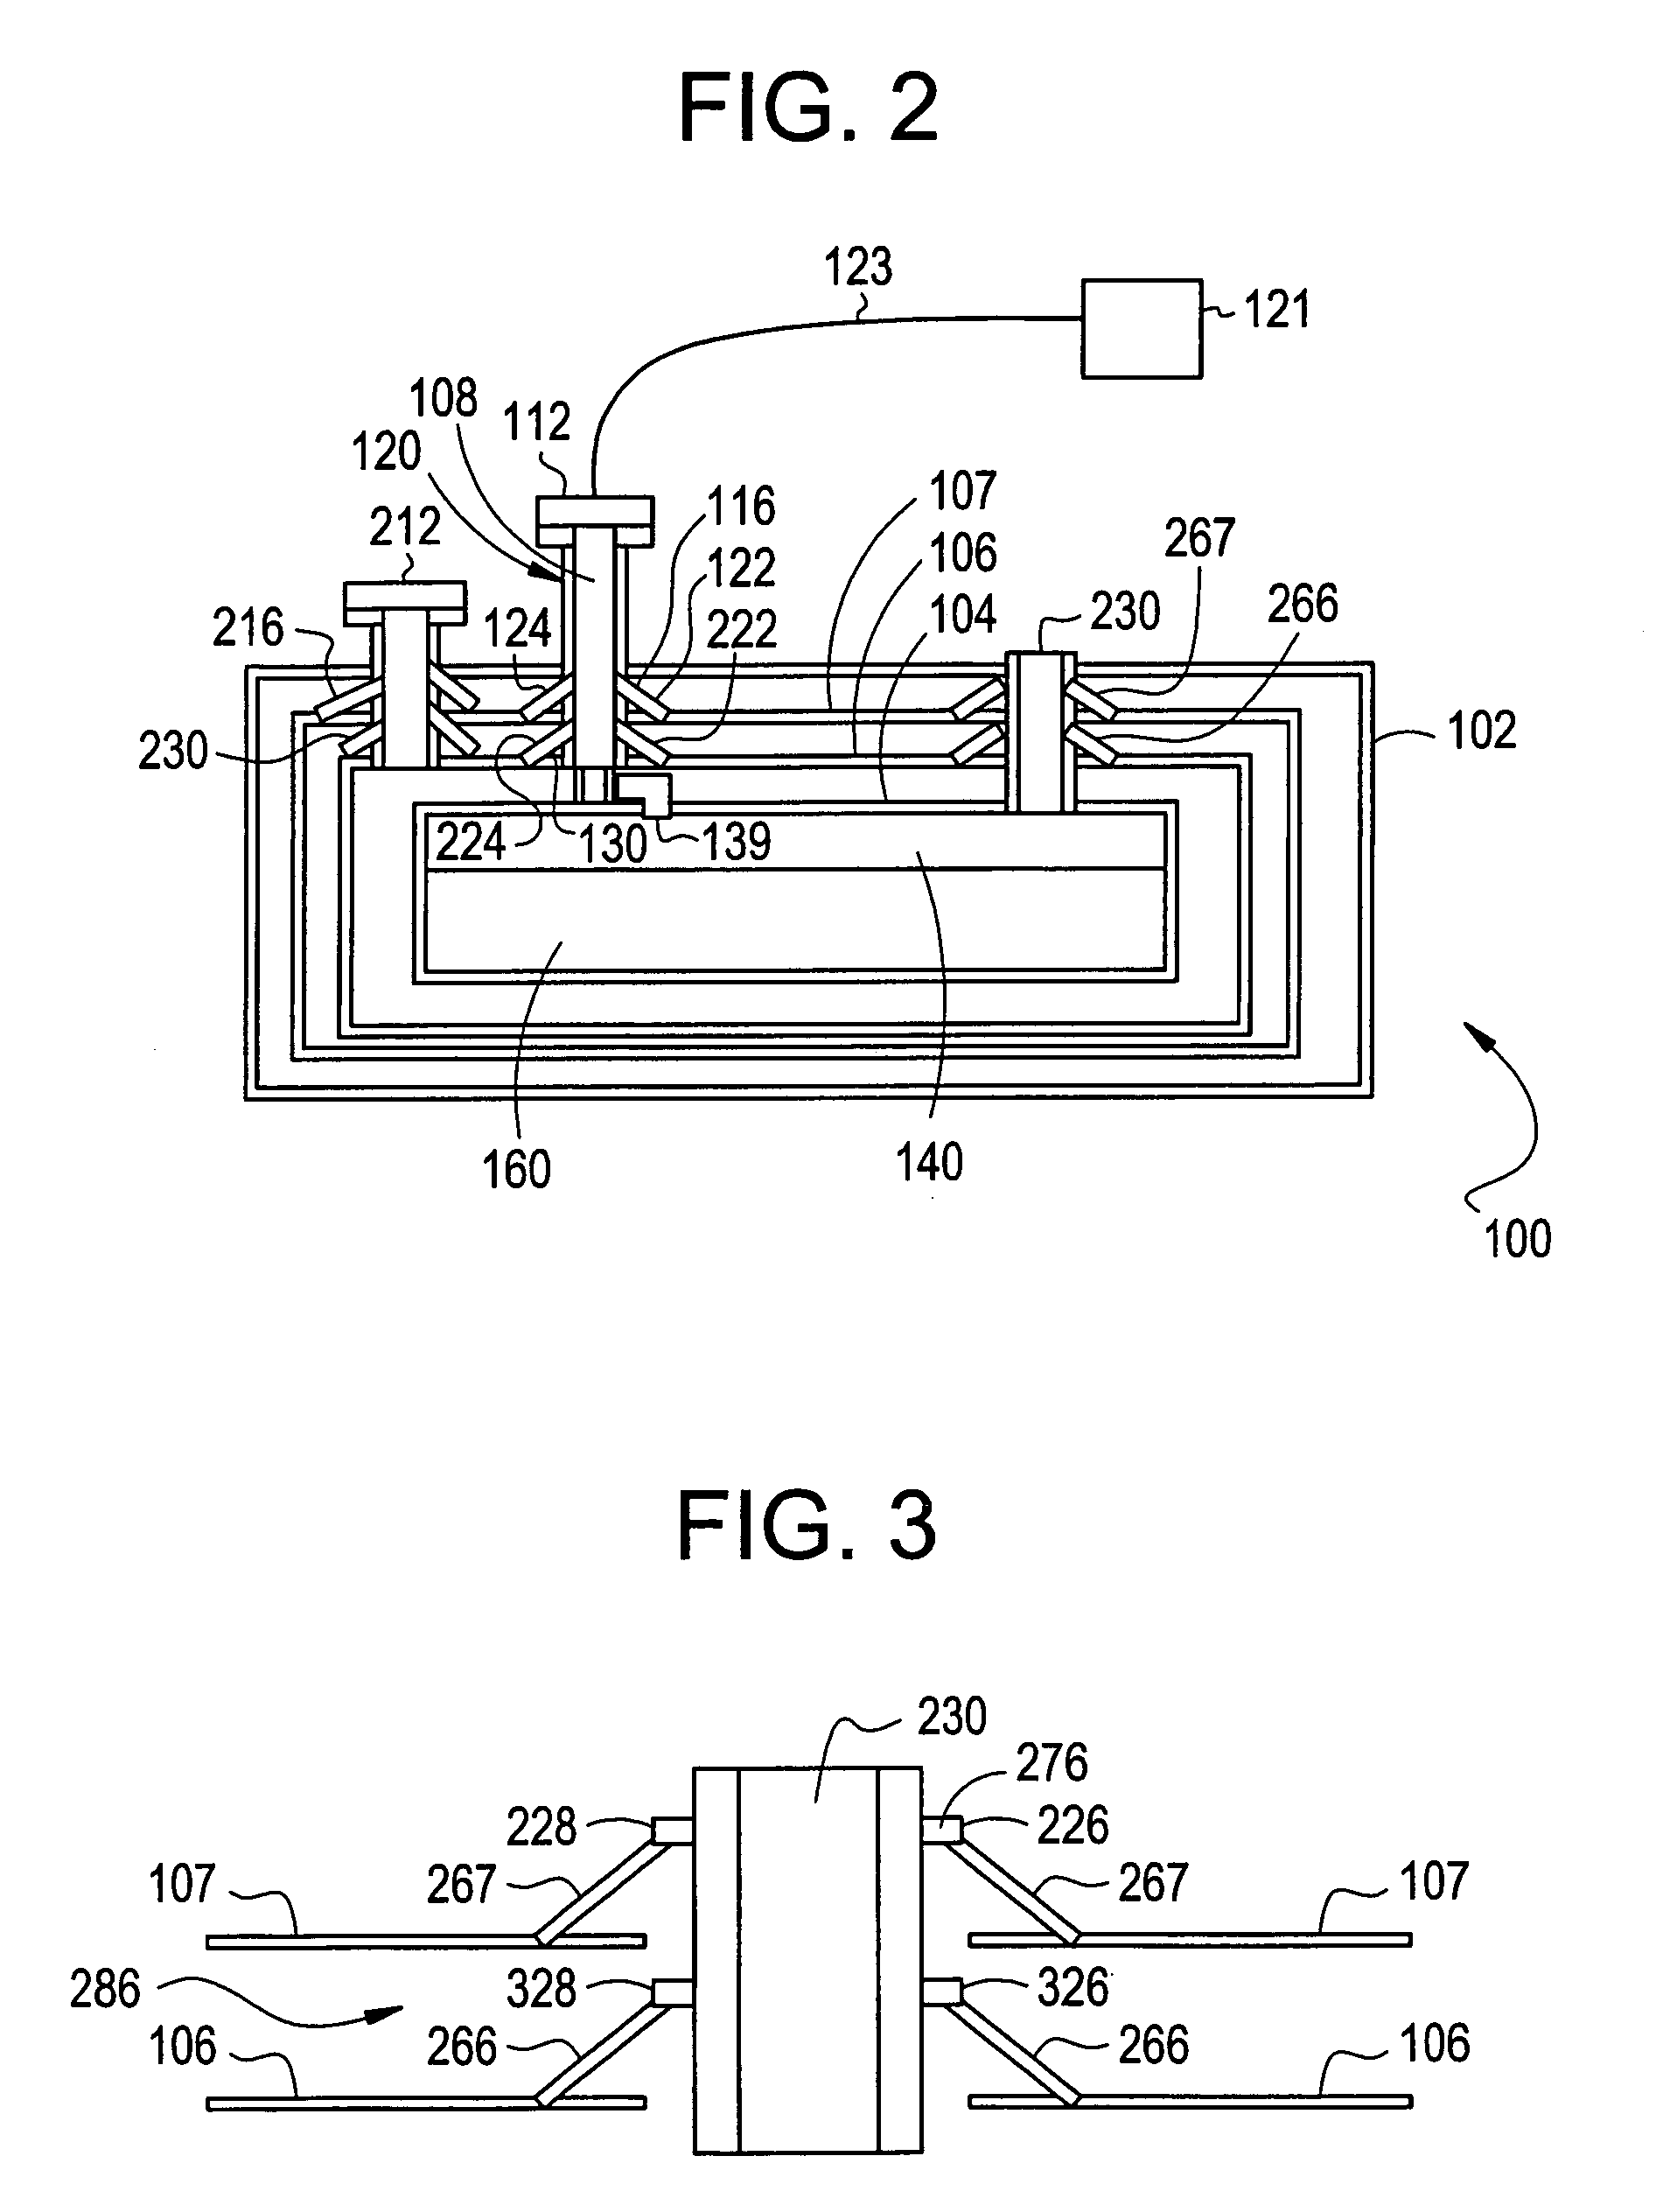 Superconductive magnet including a cryocooler coldhead